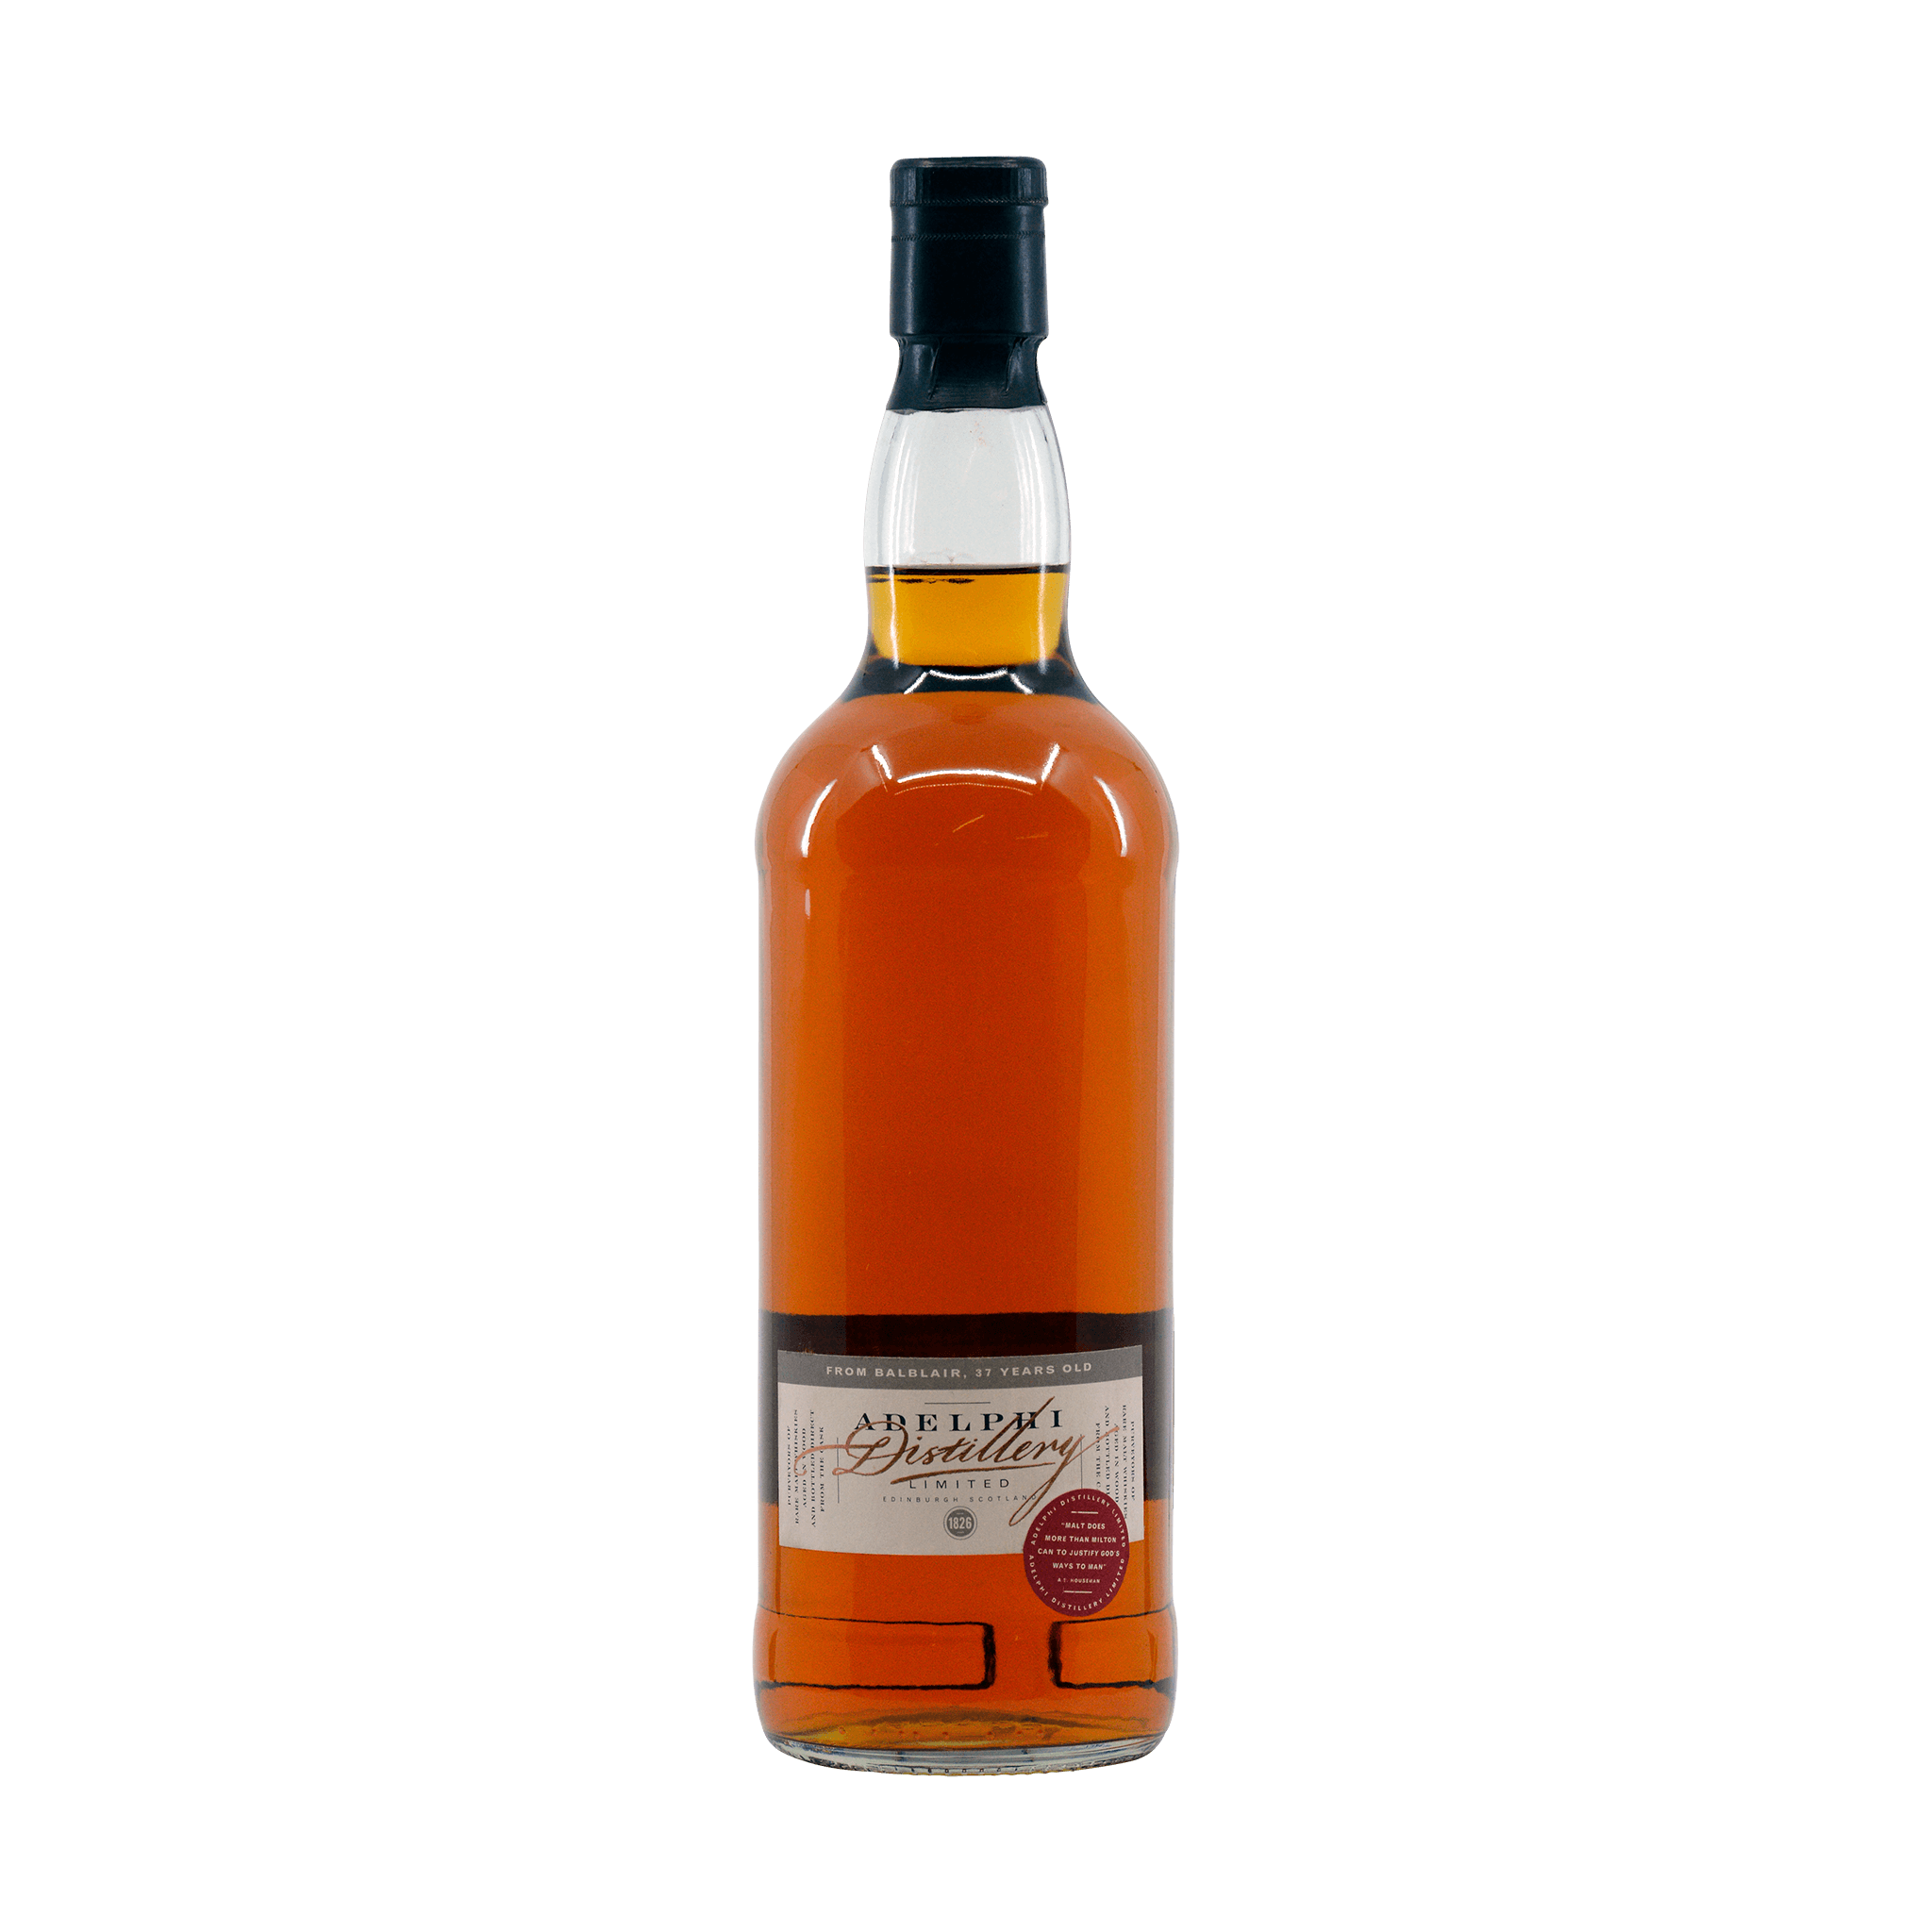 Balblair 1965 37 Year Old Adelphi 54 30 75cl Whisky Business